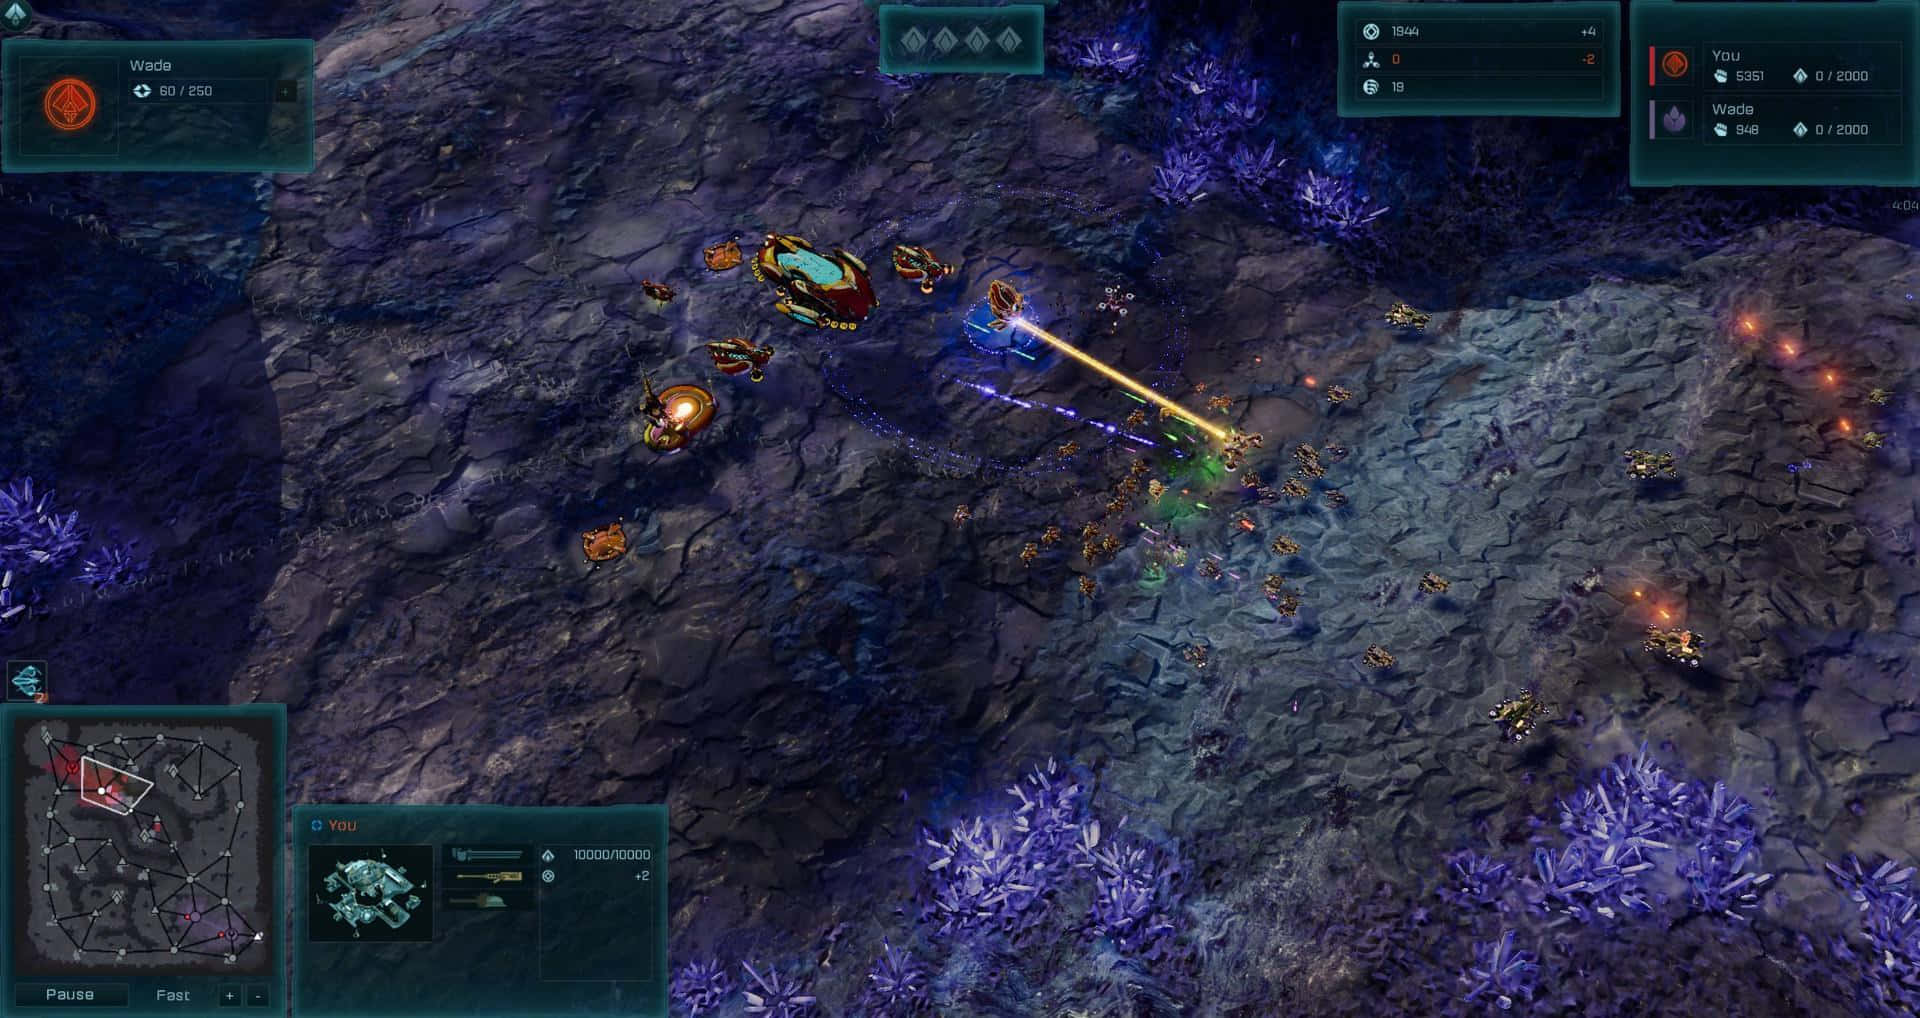 Enter the world of Ashes of the Singularity Escalation - An RTS sci-fi epic